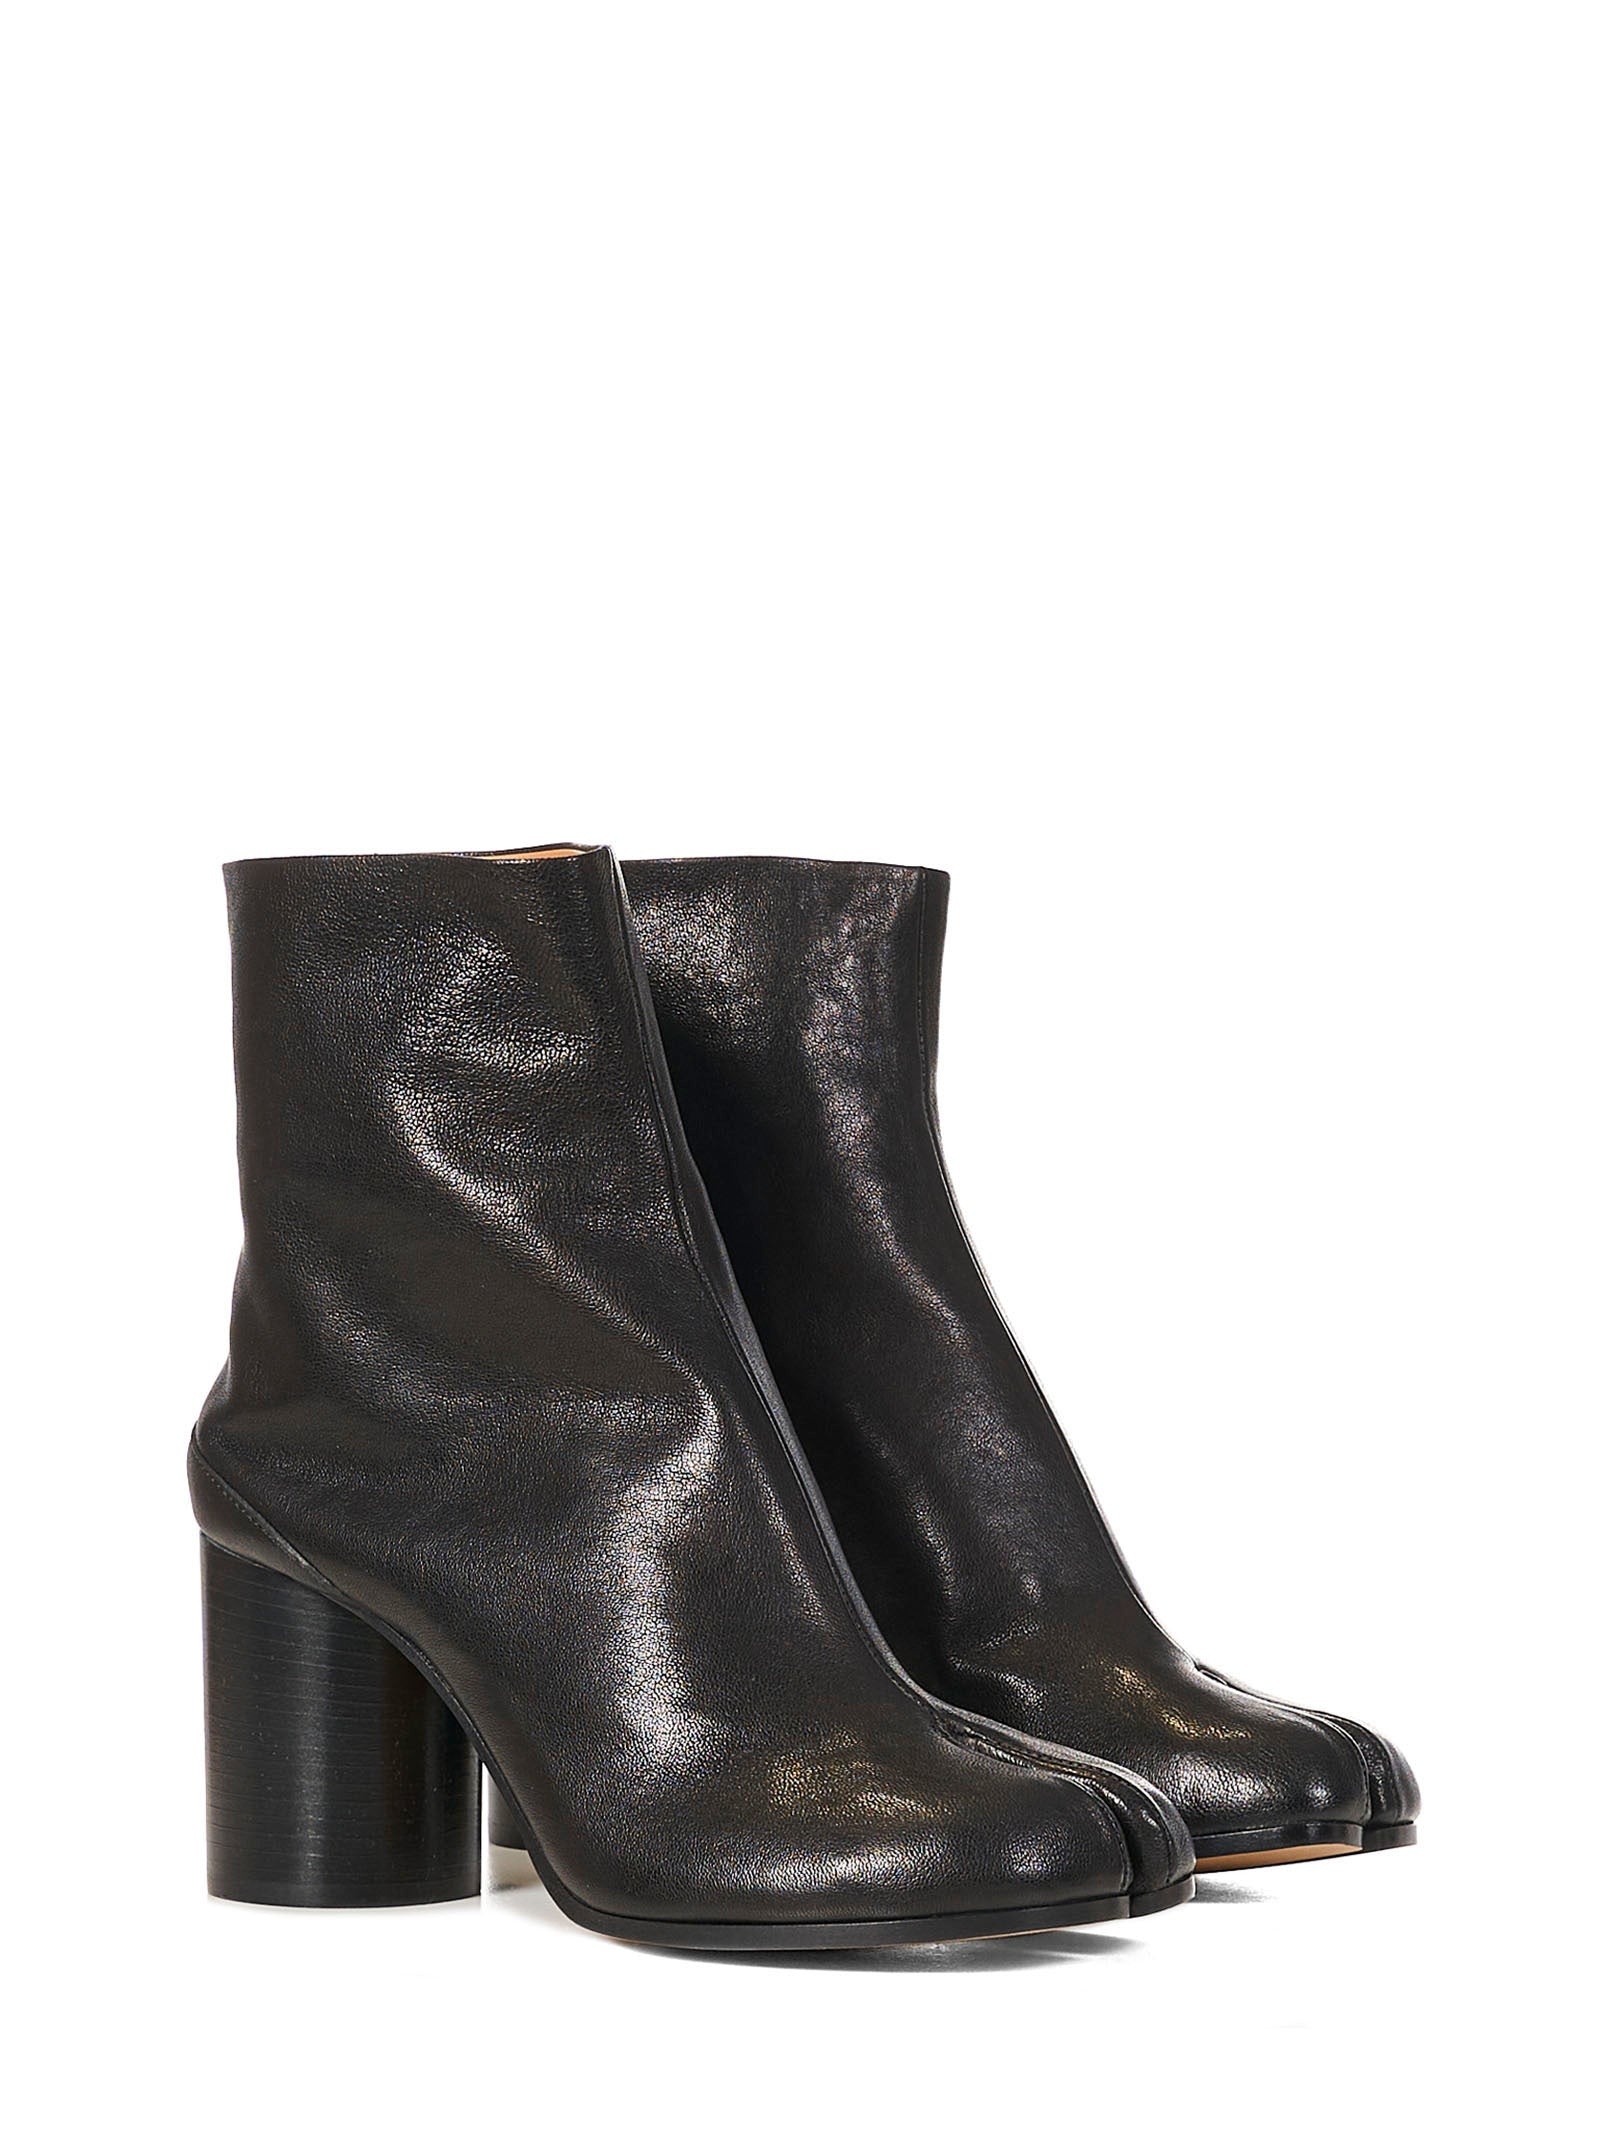 Black vintage leather ankle boots with Tabi split-toe and cylindrical heel. - 2